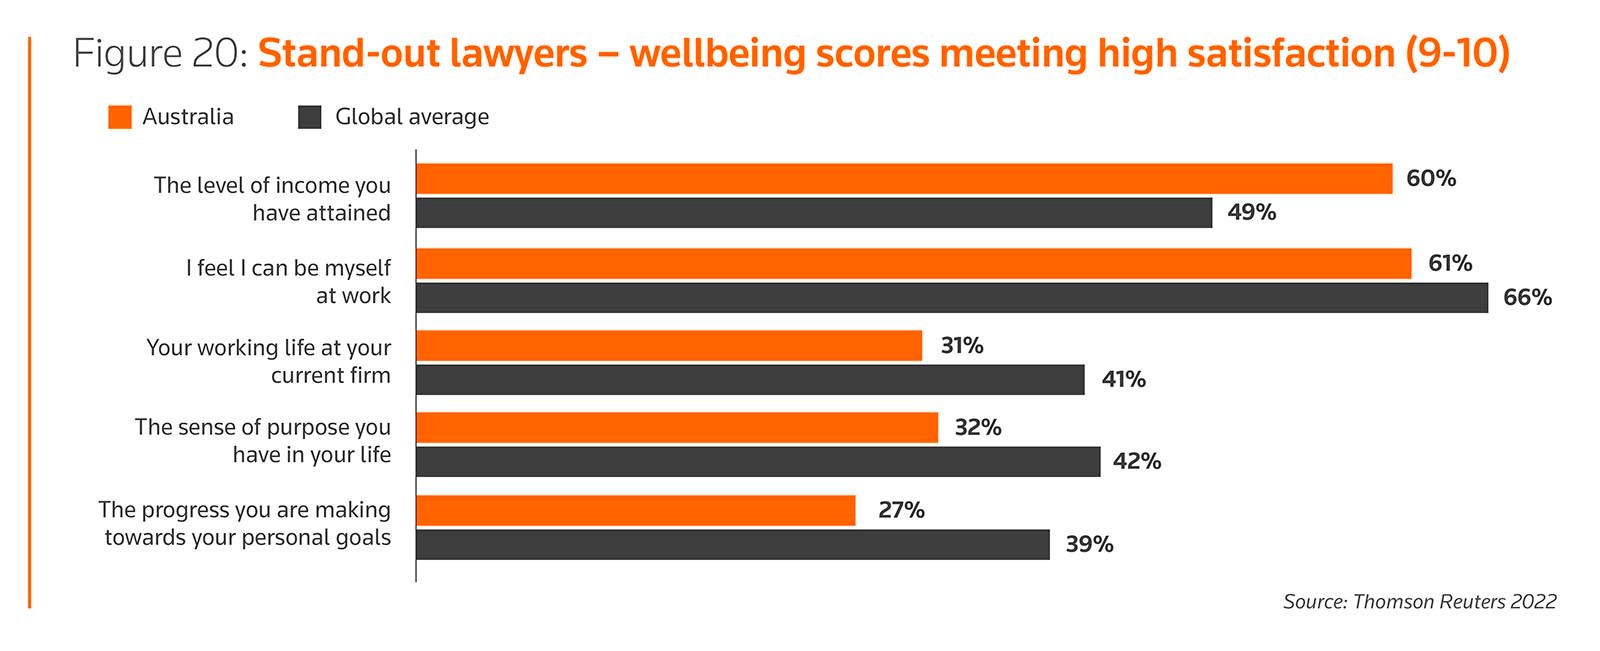 Stand-out lawyers: Well-being scores meeting high satisfaction (9-10)